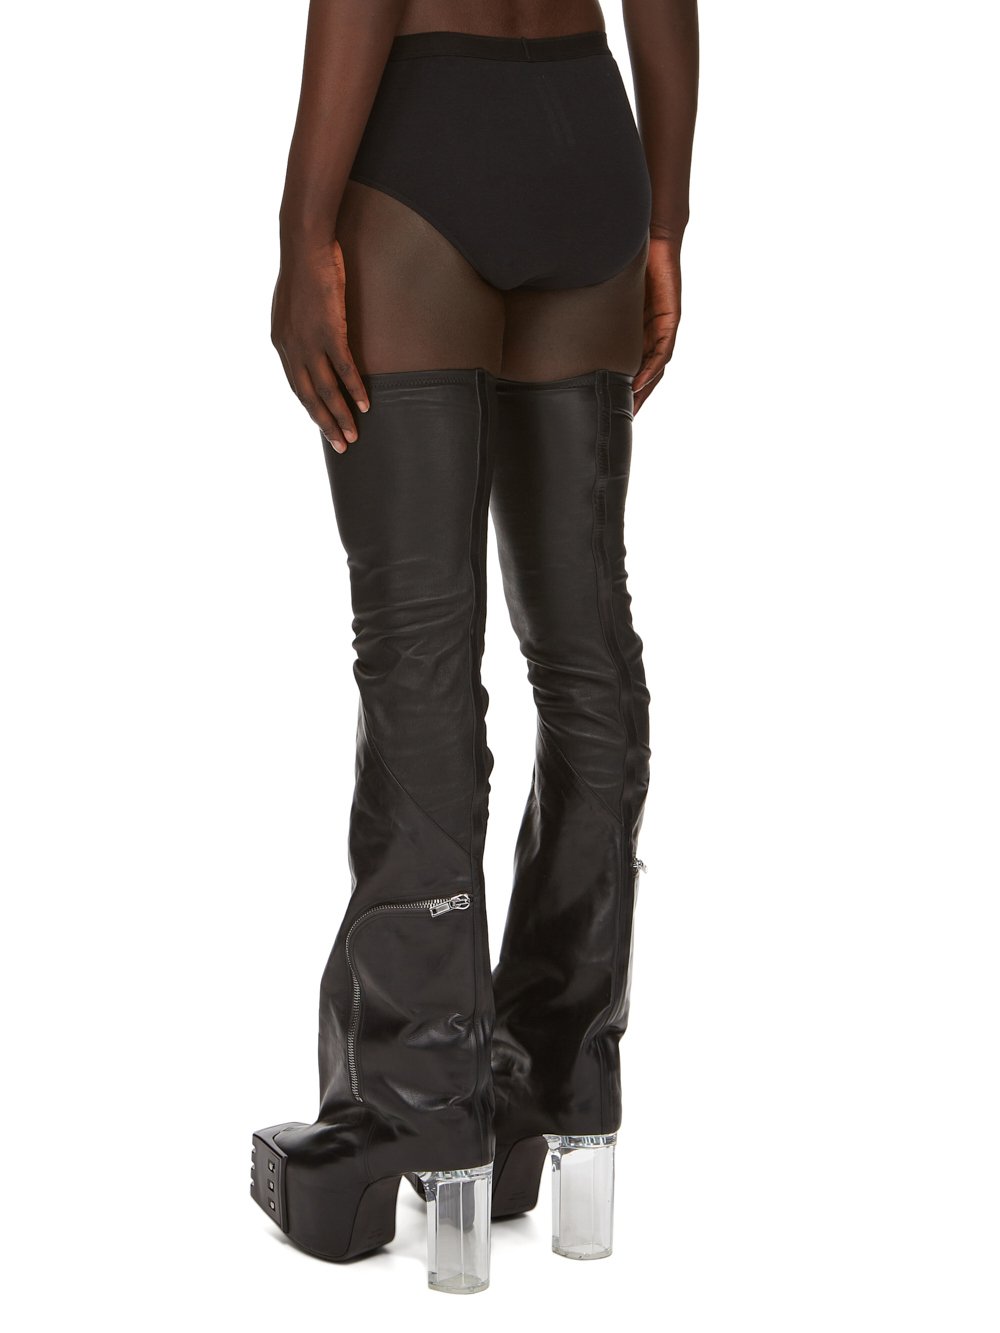 RICK OWENS FW23 LUXOR PENTABRIEF IN  BLACK SEACELL RIB JERSEY 